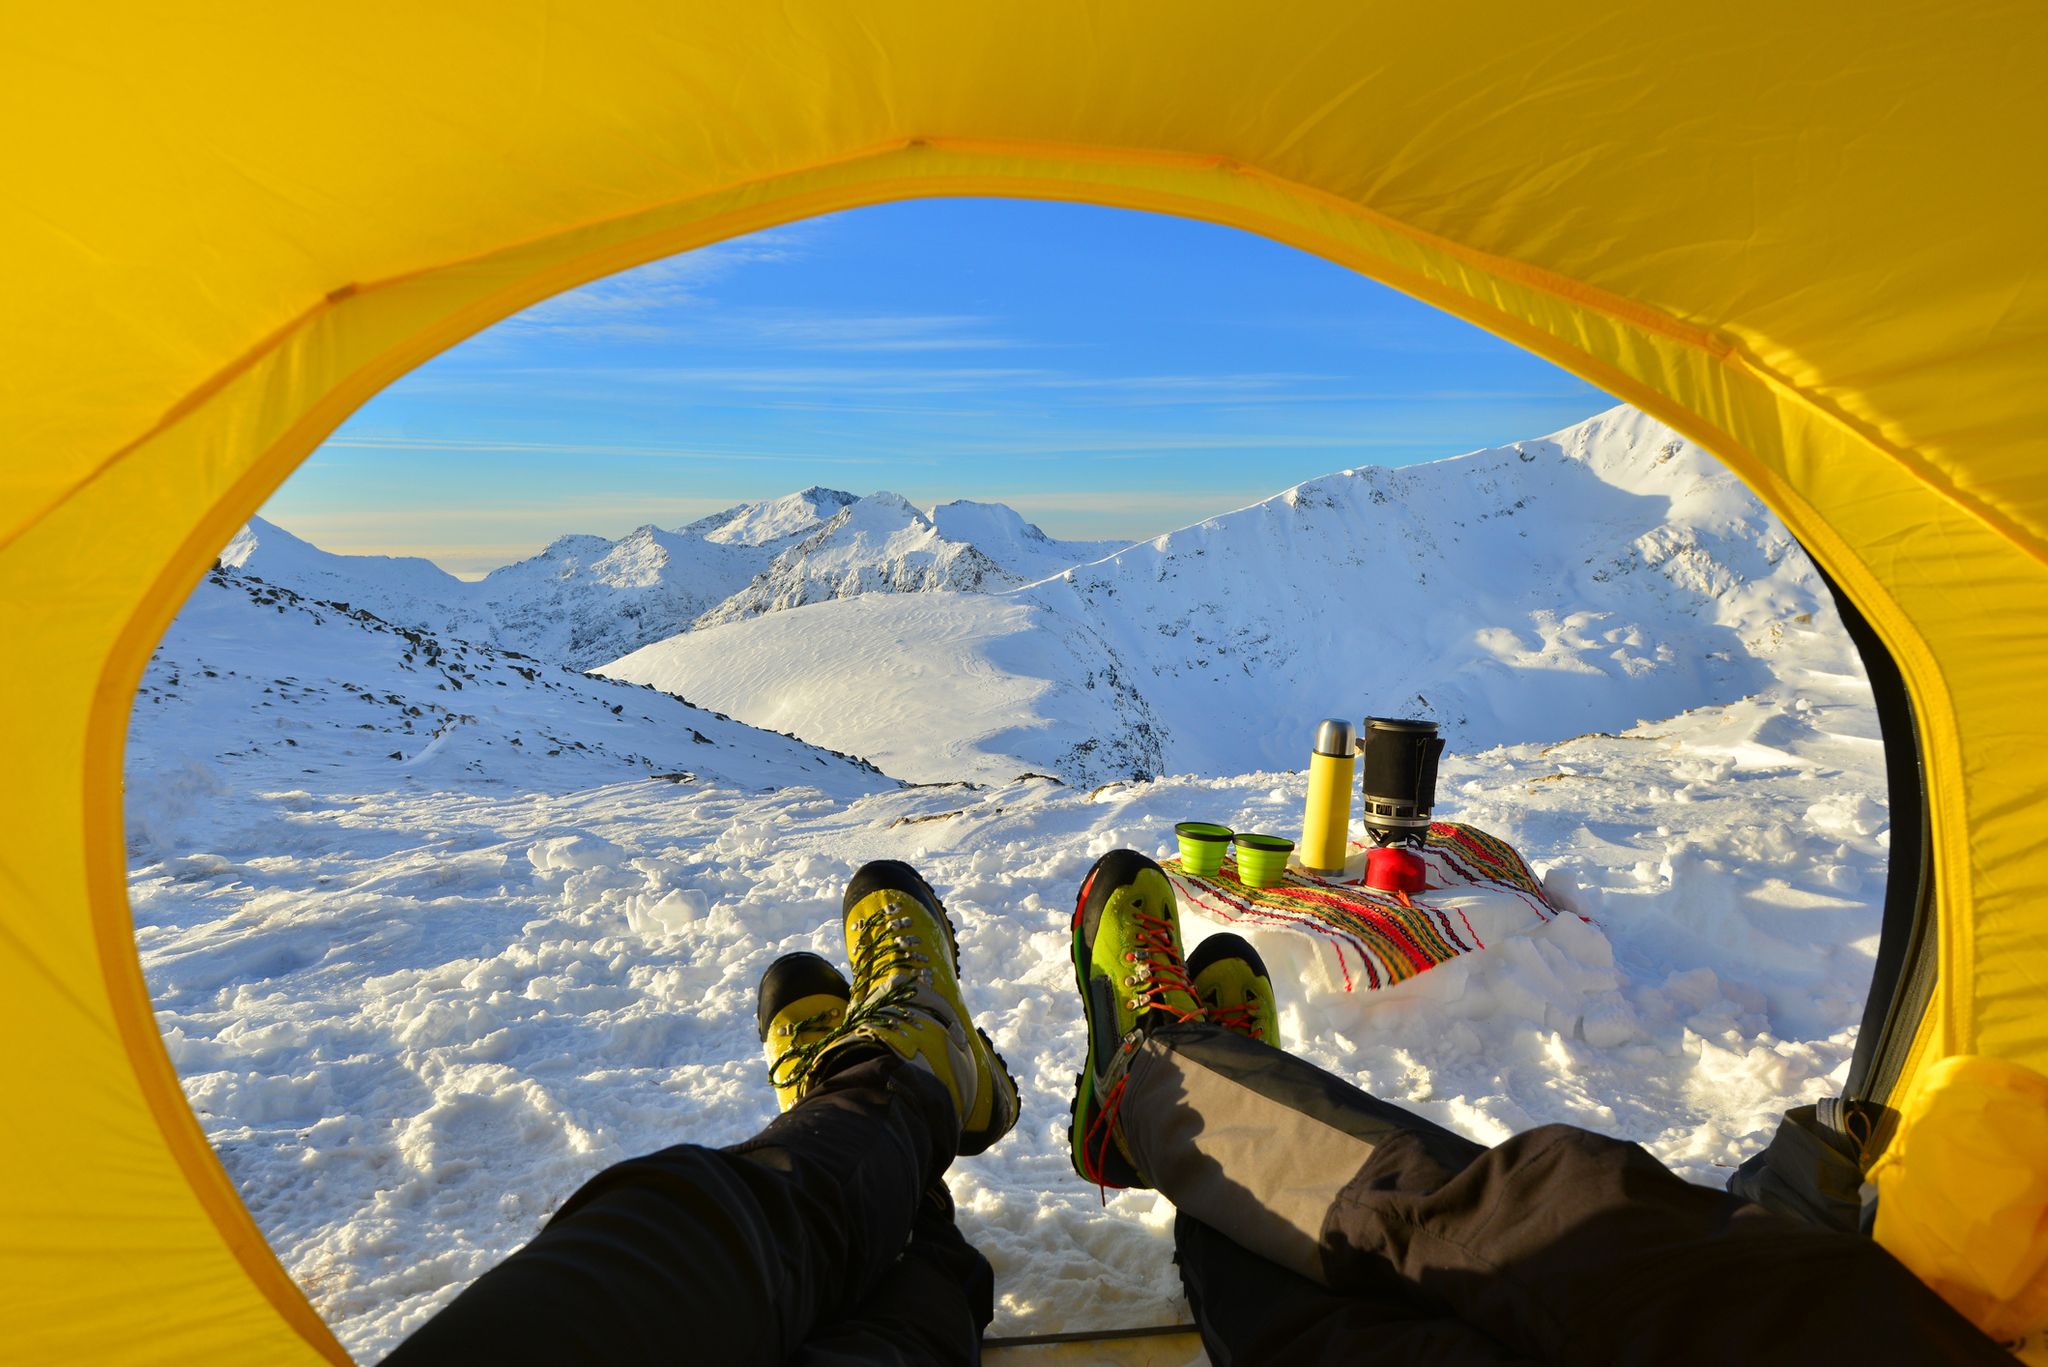 view from inside a yellow tent showing two peoples' legs with boots on, snowy mountains in distance